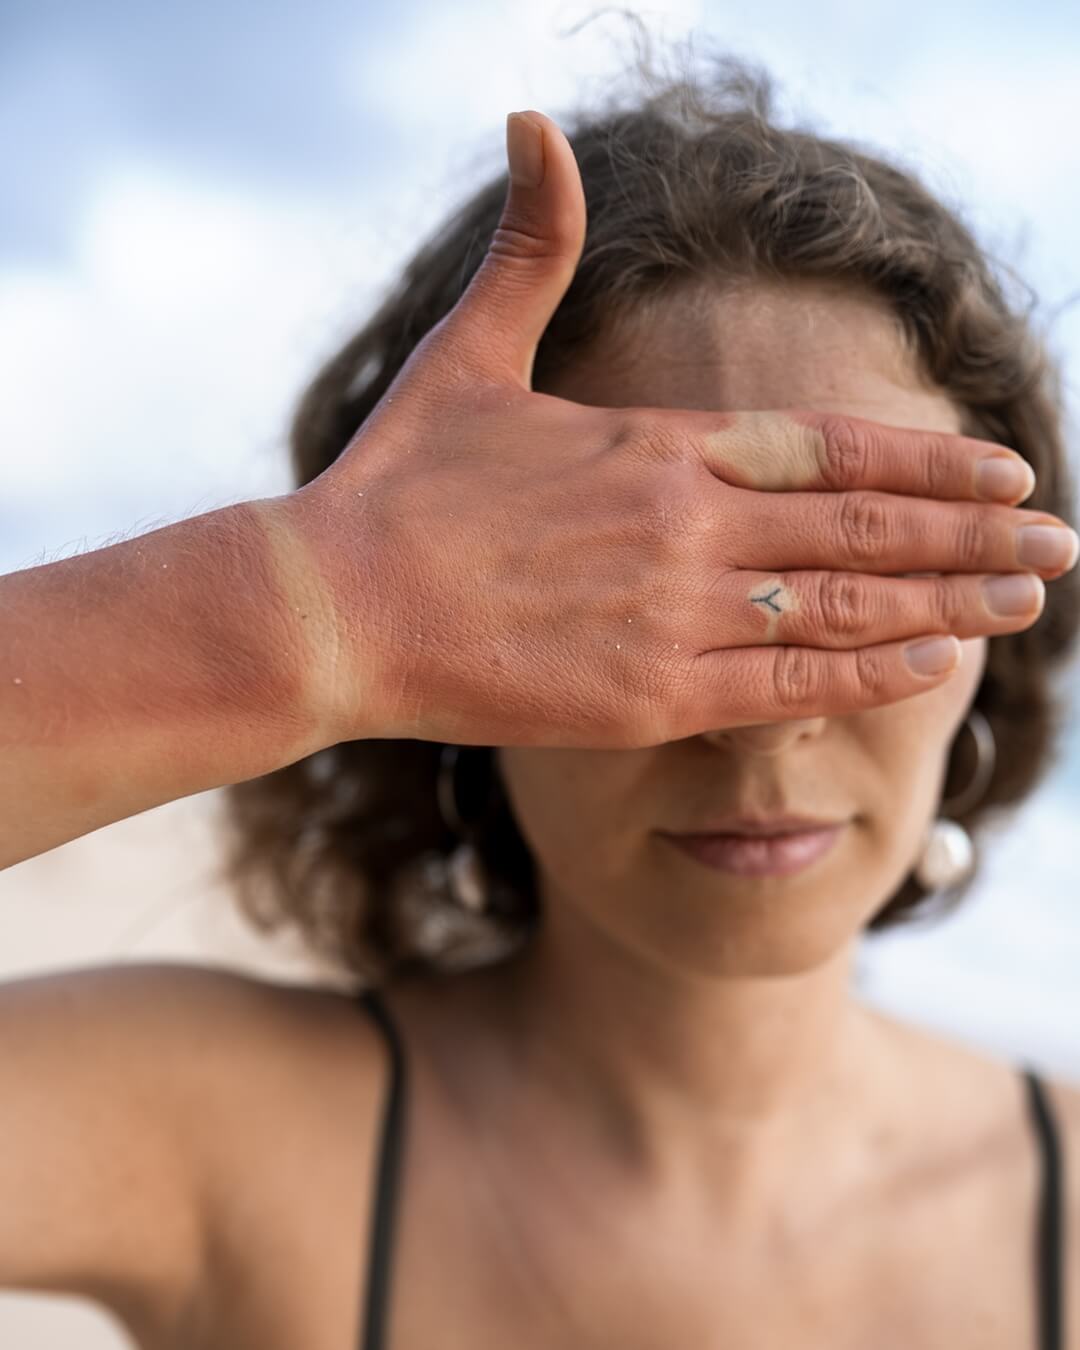 close-up of woman's sunburn skin from beach sun, a reminder to wear sustainable hats